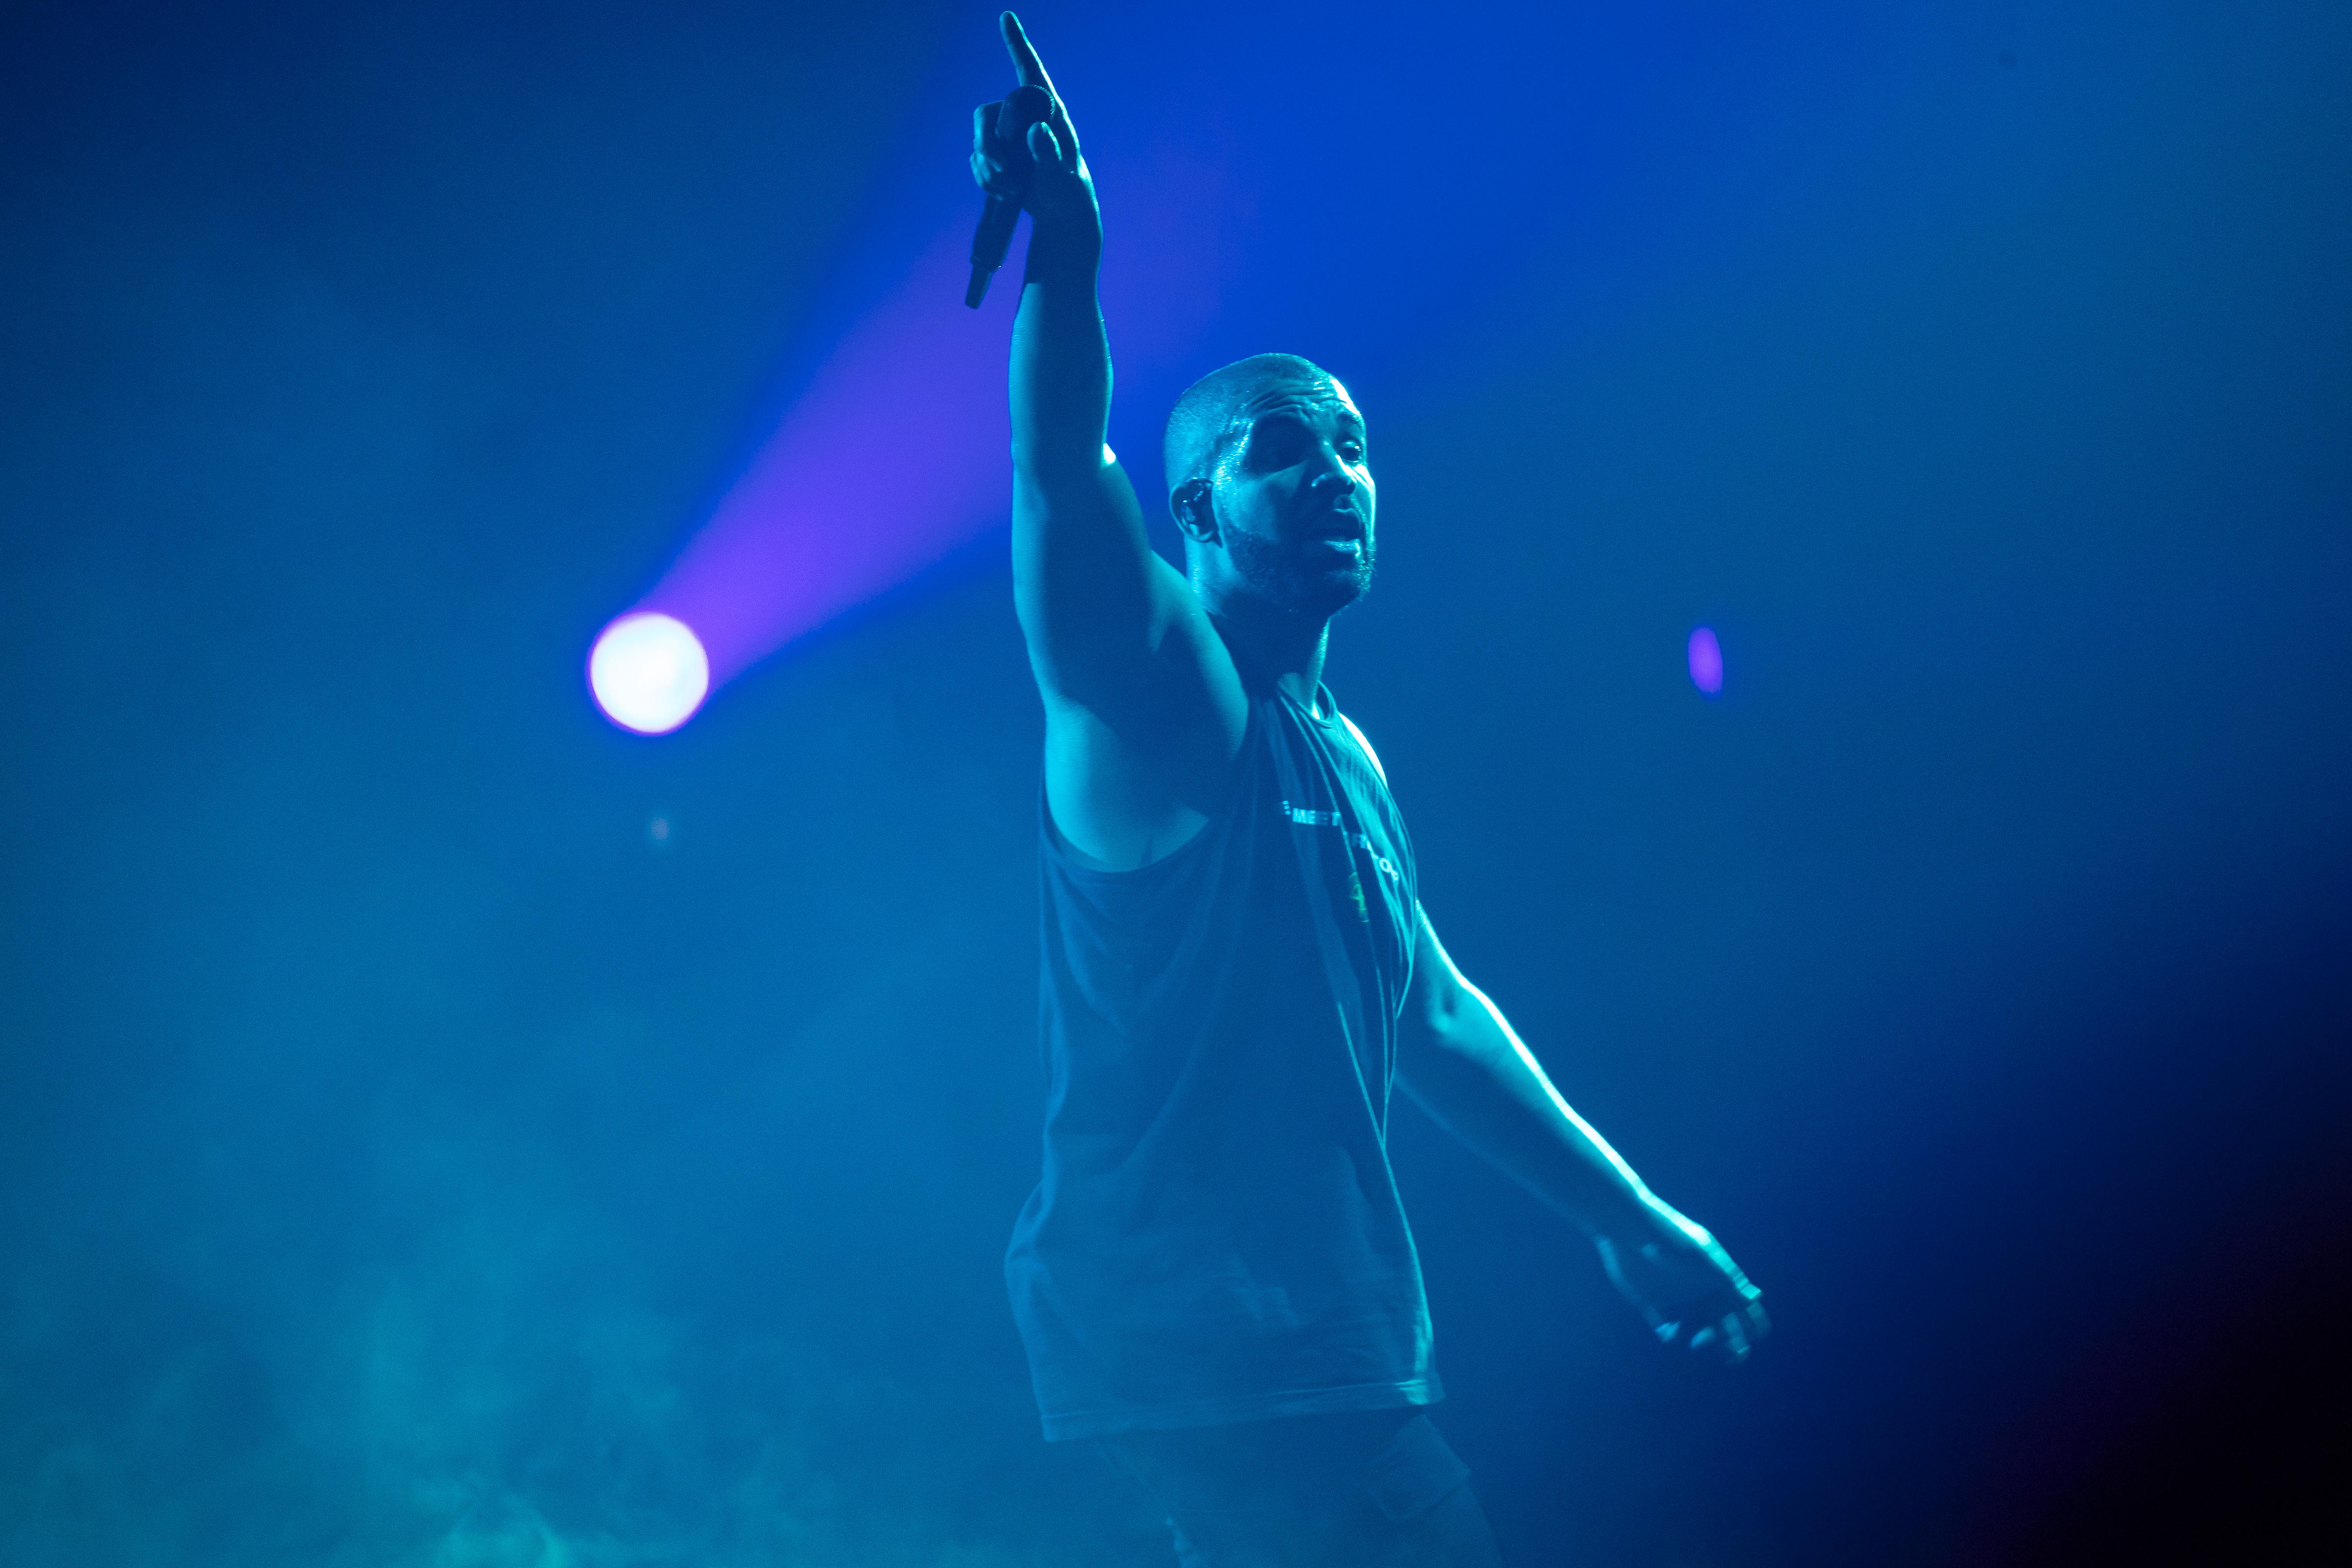 Fan leaves Drake speechless after throwing a 36L bra on stage